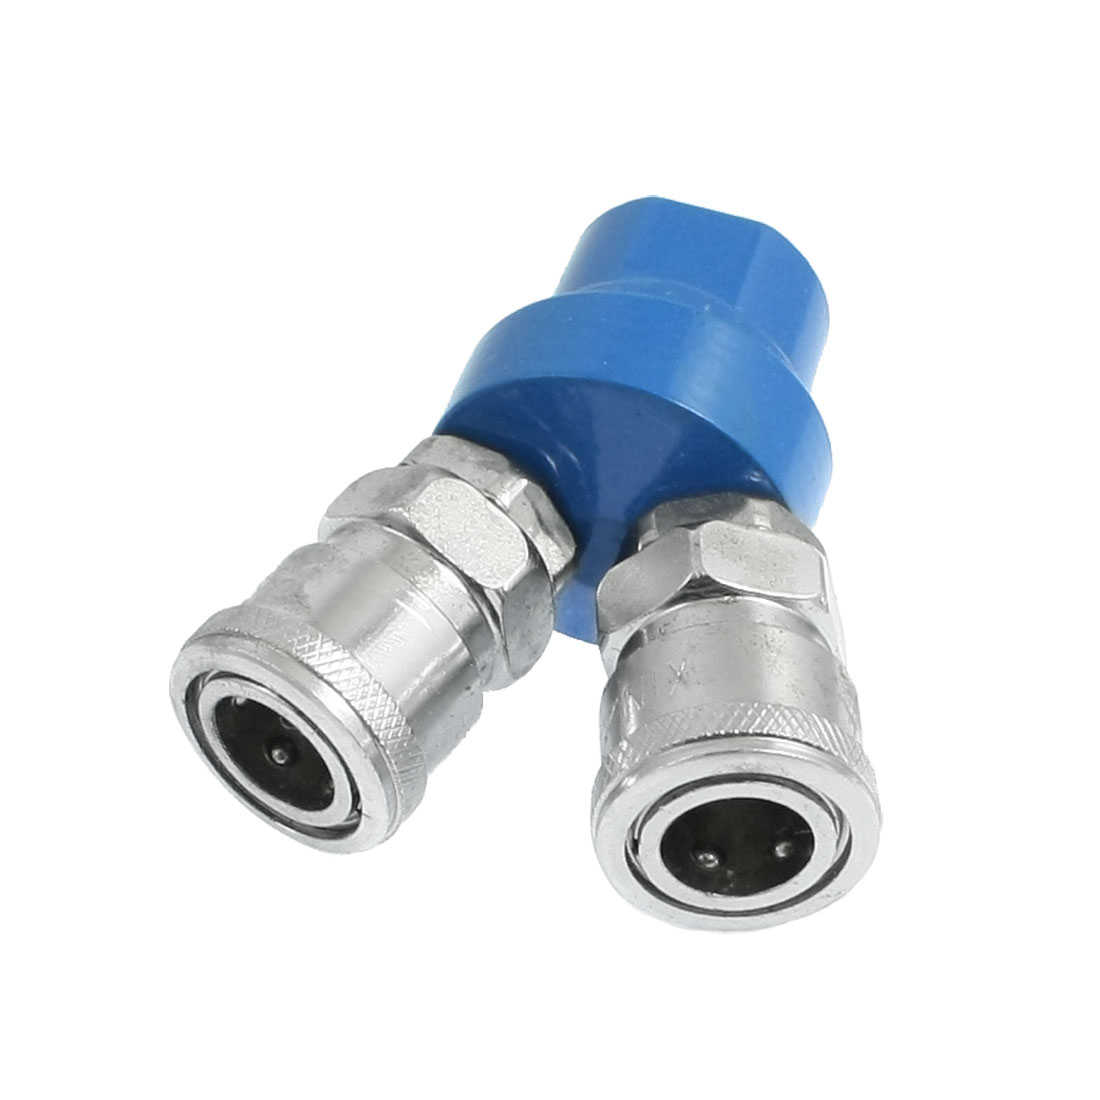 12mm Female Thread 2 Splitter Adapter Connector for Air Compressor